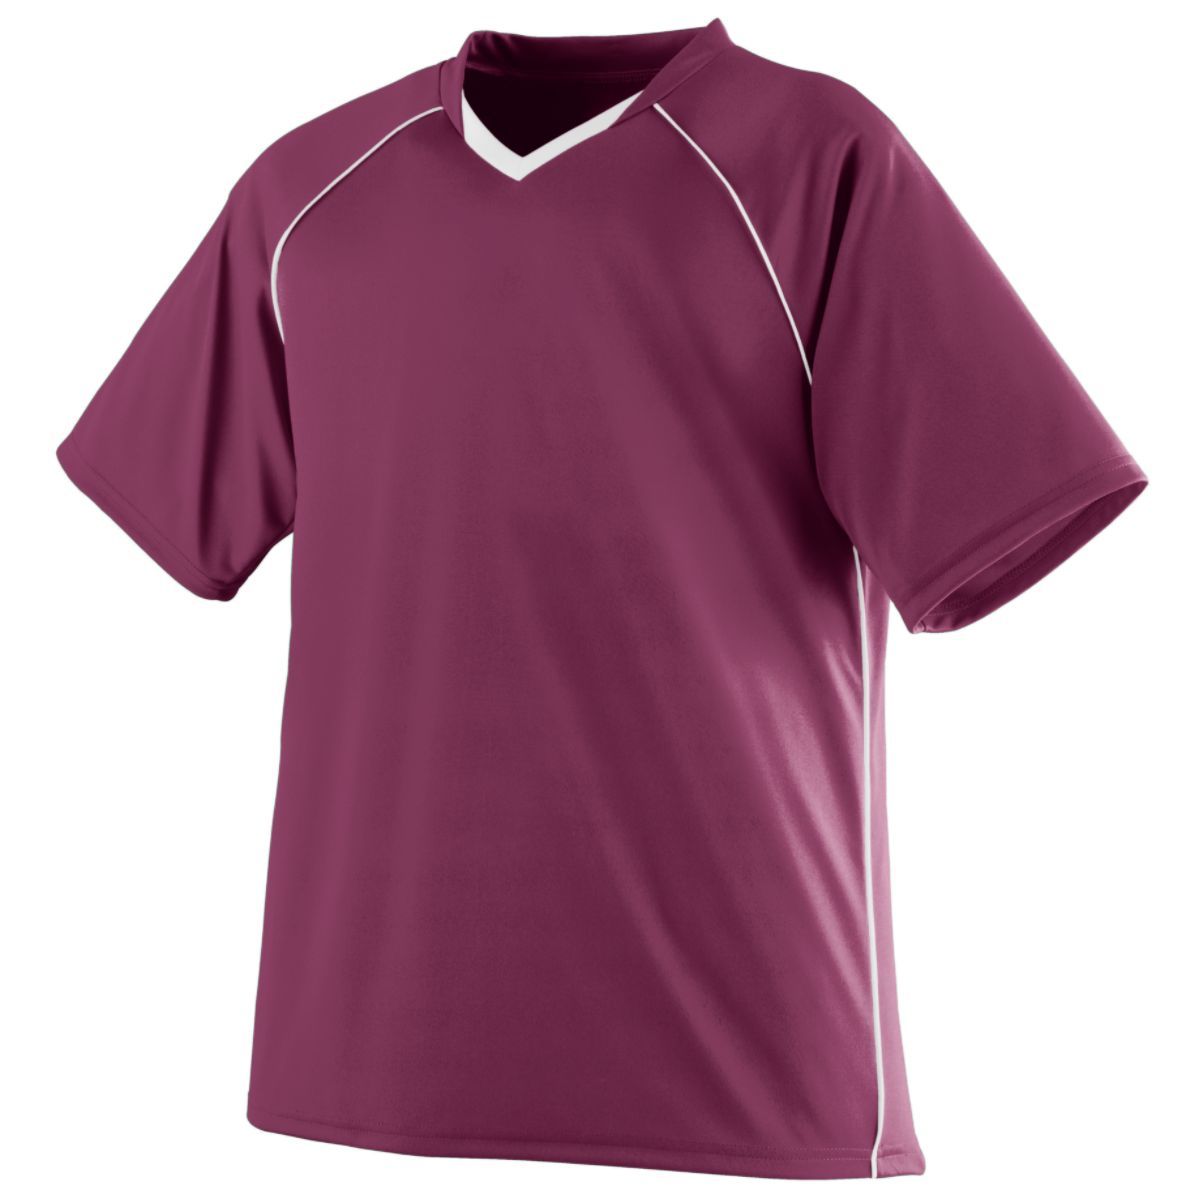 Augusta Sportswear Striker Jersey in Maroon/White  -Part of the Adult, Adult-Jersey, Augusta-Products, Soccer, Shirts, All-Sports-1 product lines at KanaleyCreations.com